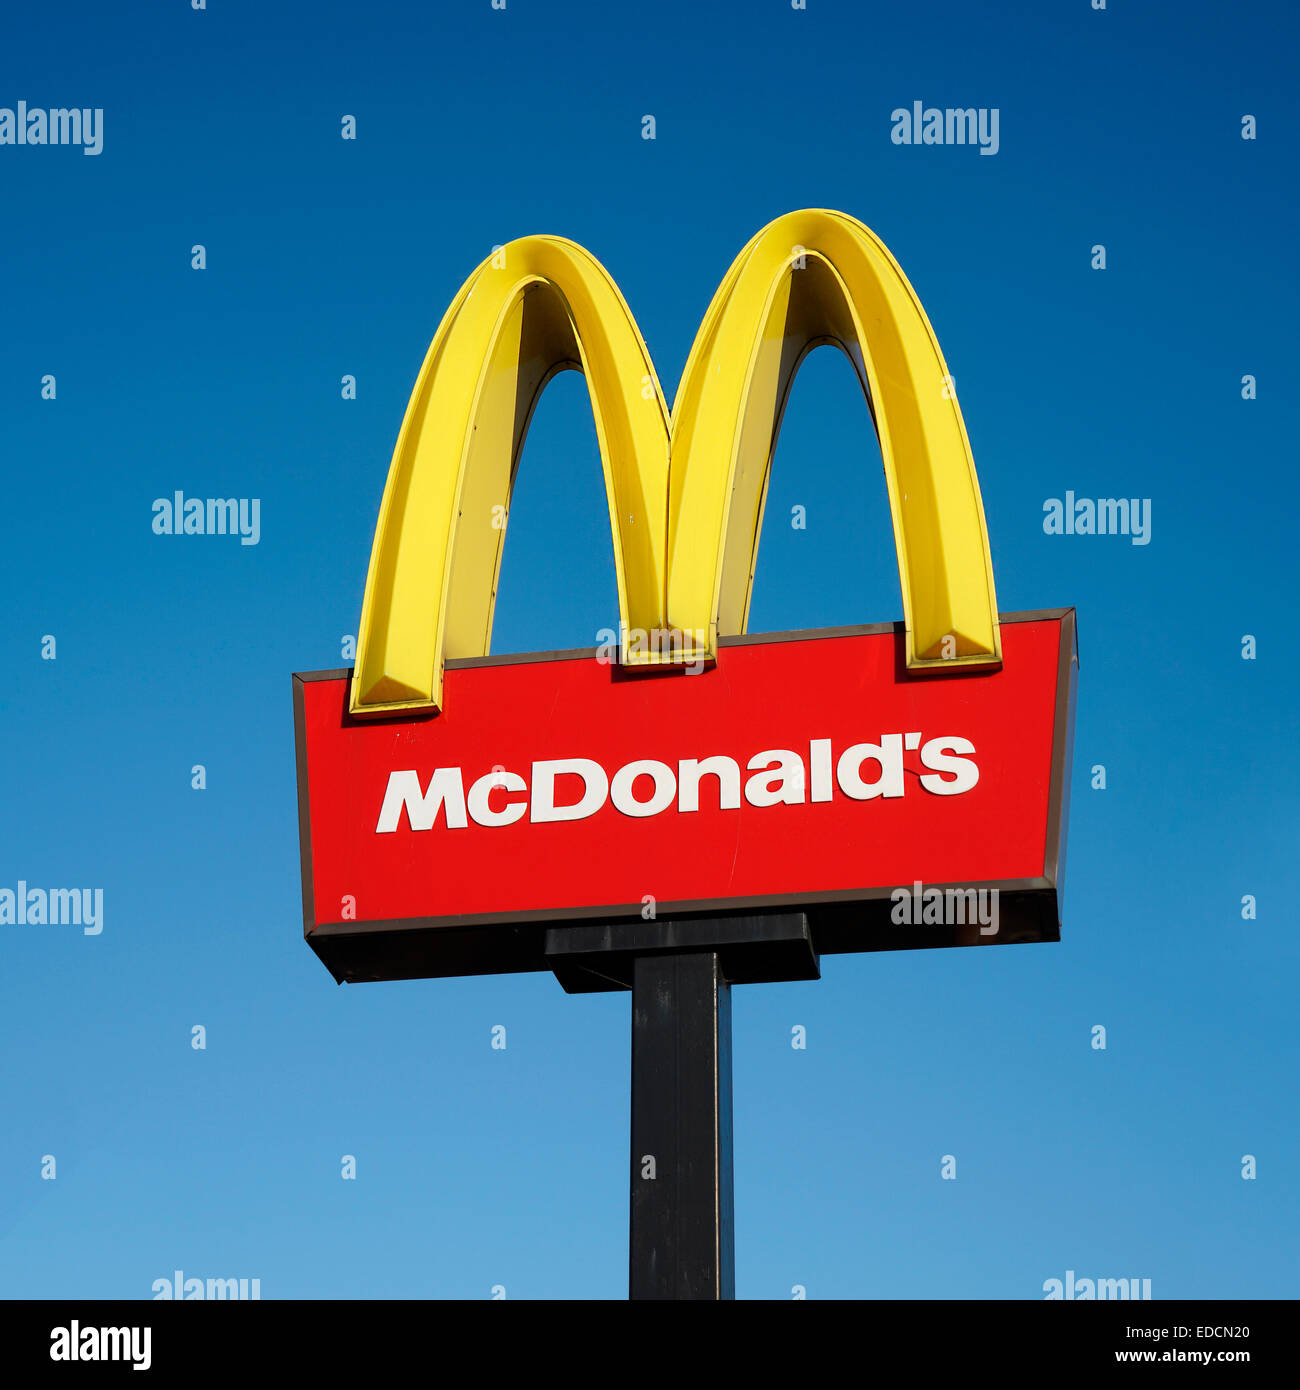 Mcdrive Sign With Mcdonalds Logo Stock Photos & Mcdrive Sign With ...